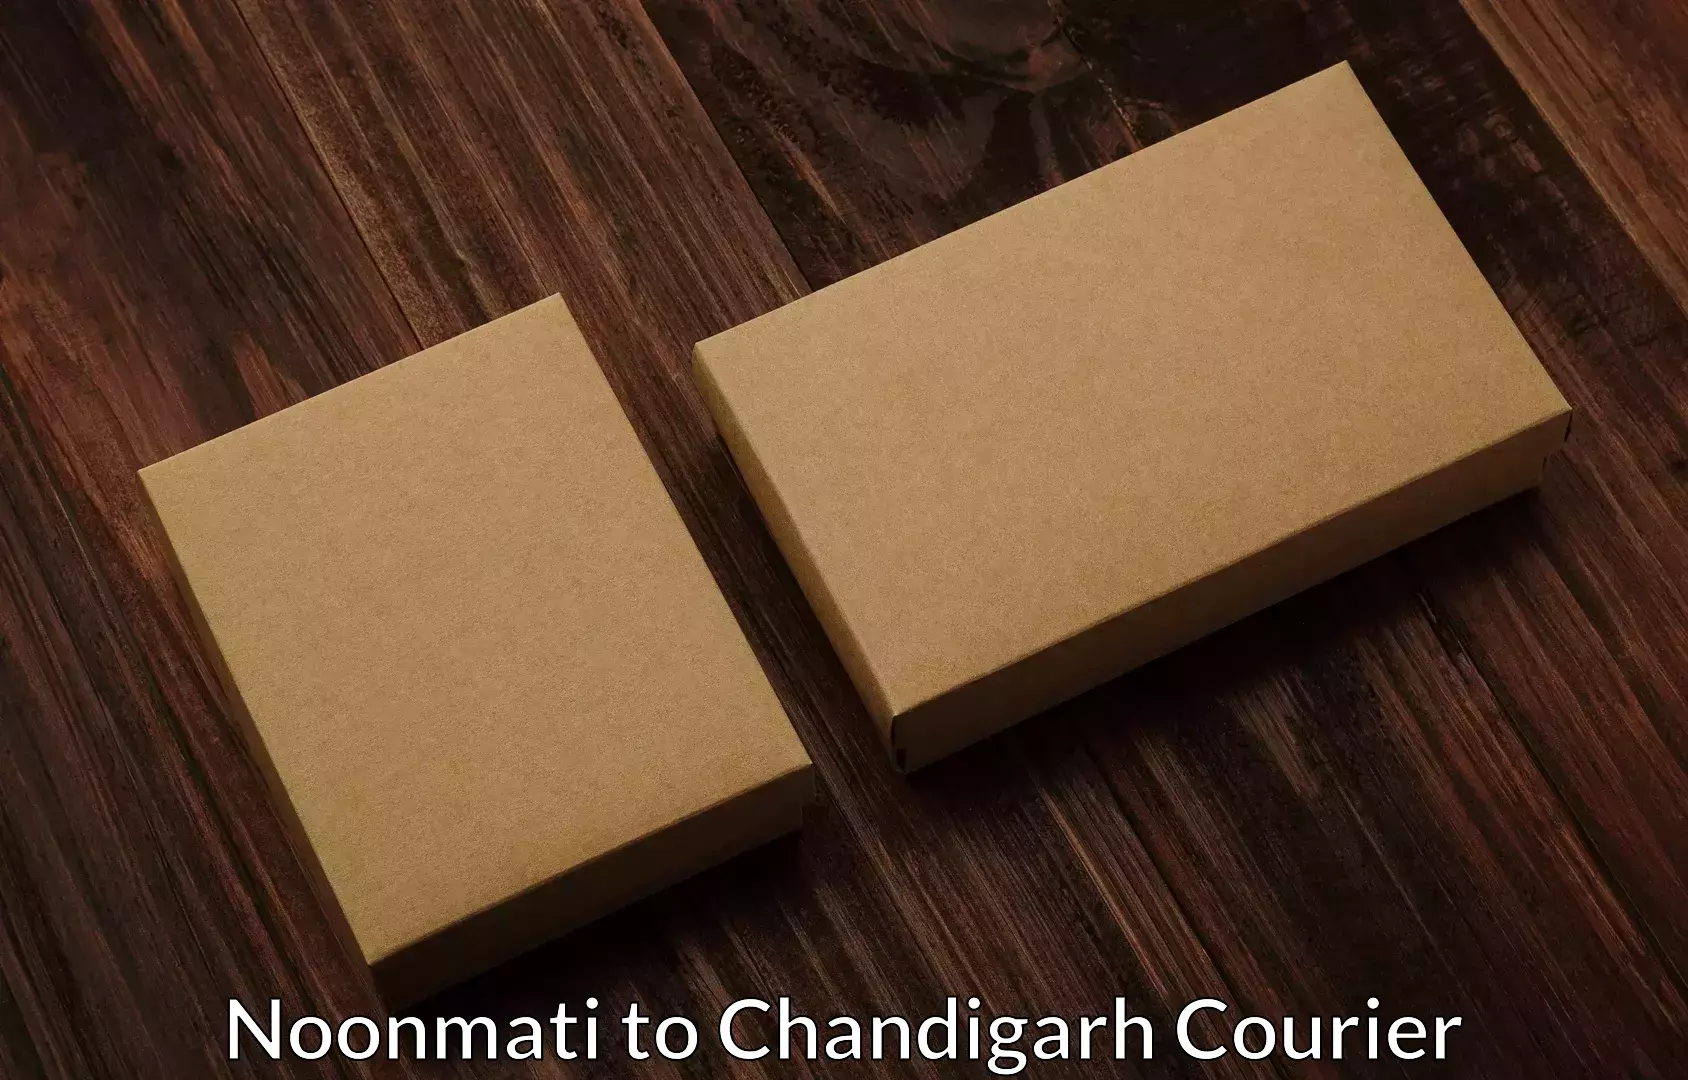 Specialized moving company Noonmati to Panjab University Chandigarh